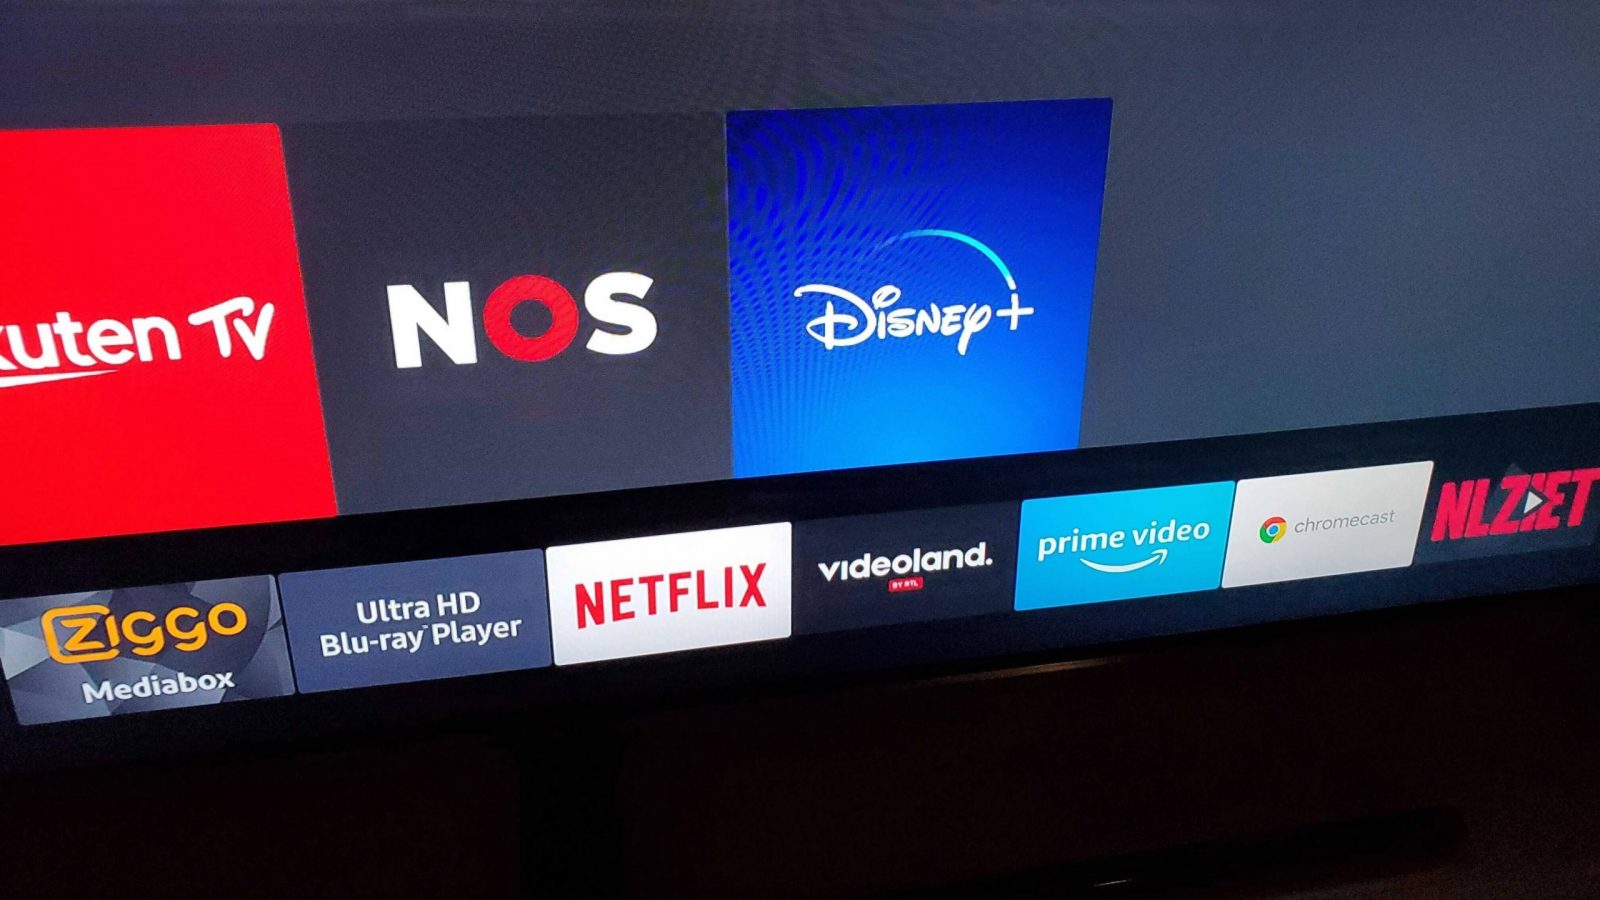 How to Watch Disney Plus on Playstation 4 (PS4) Console